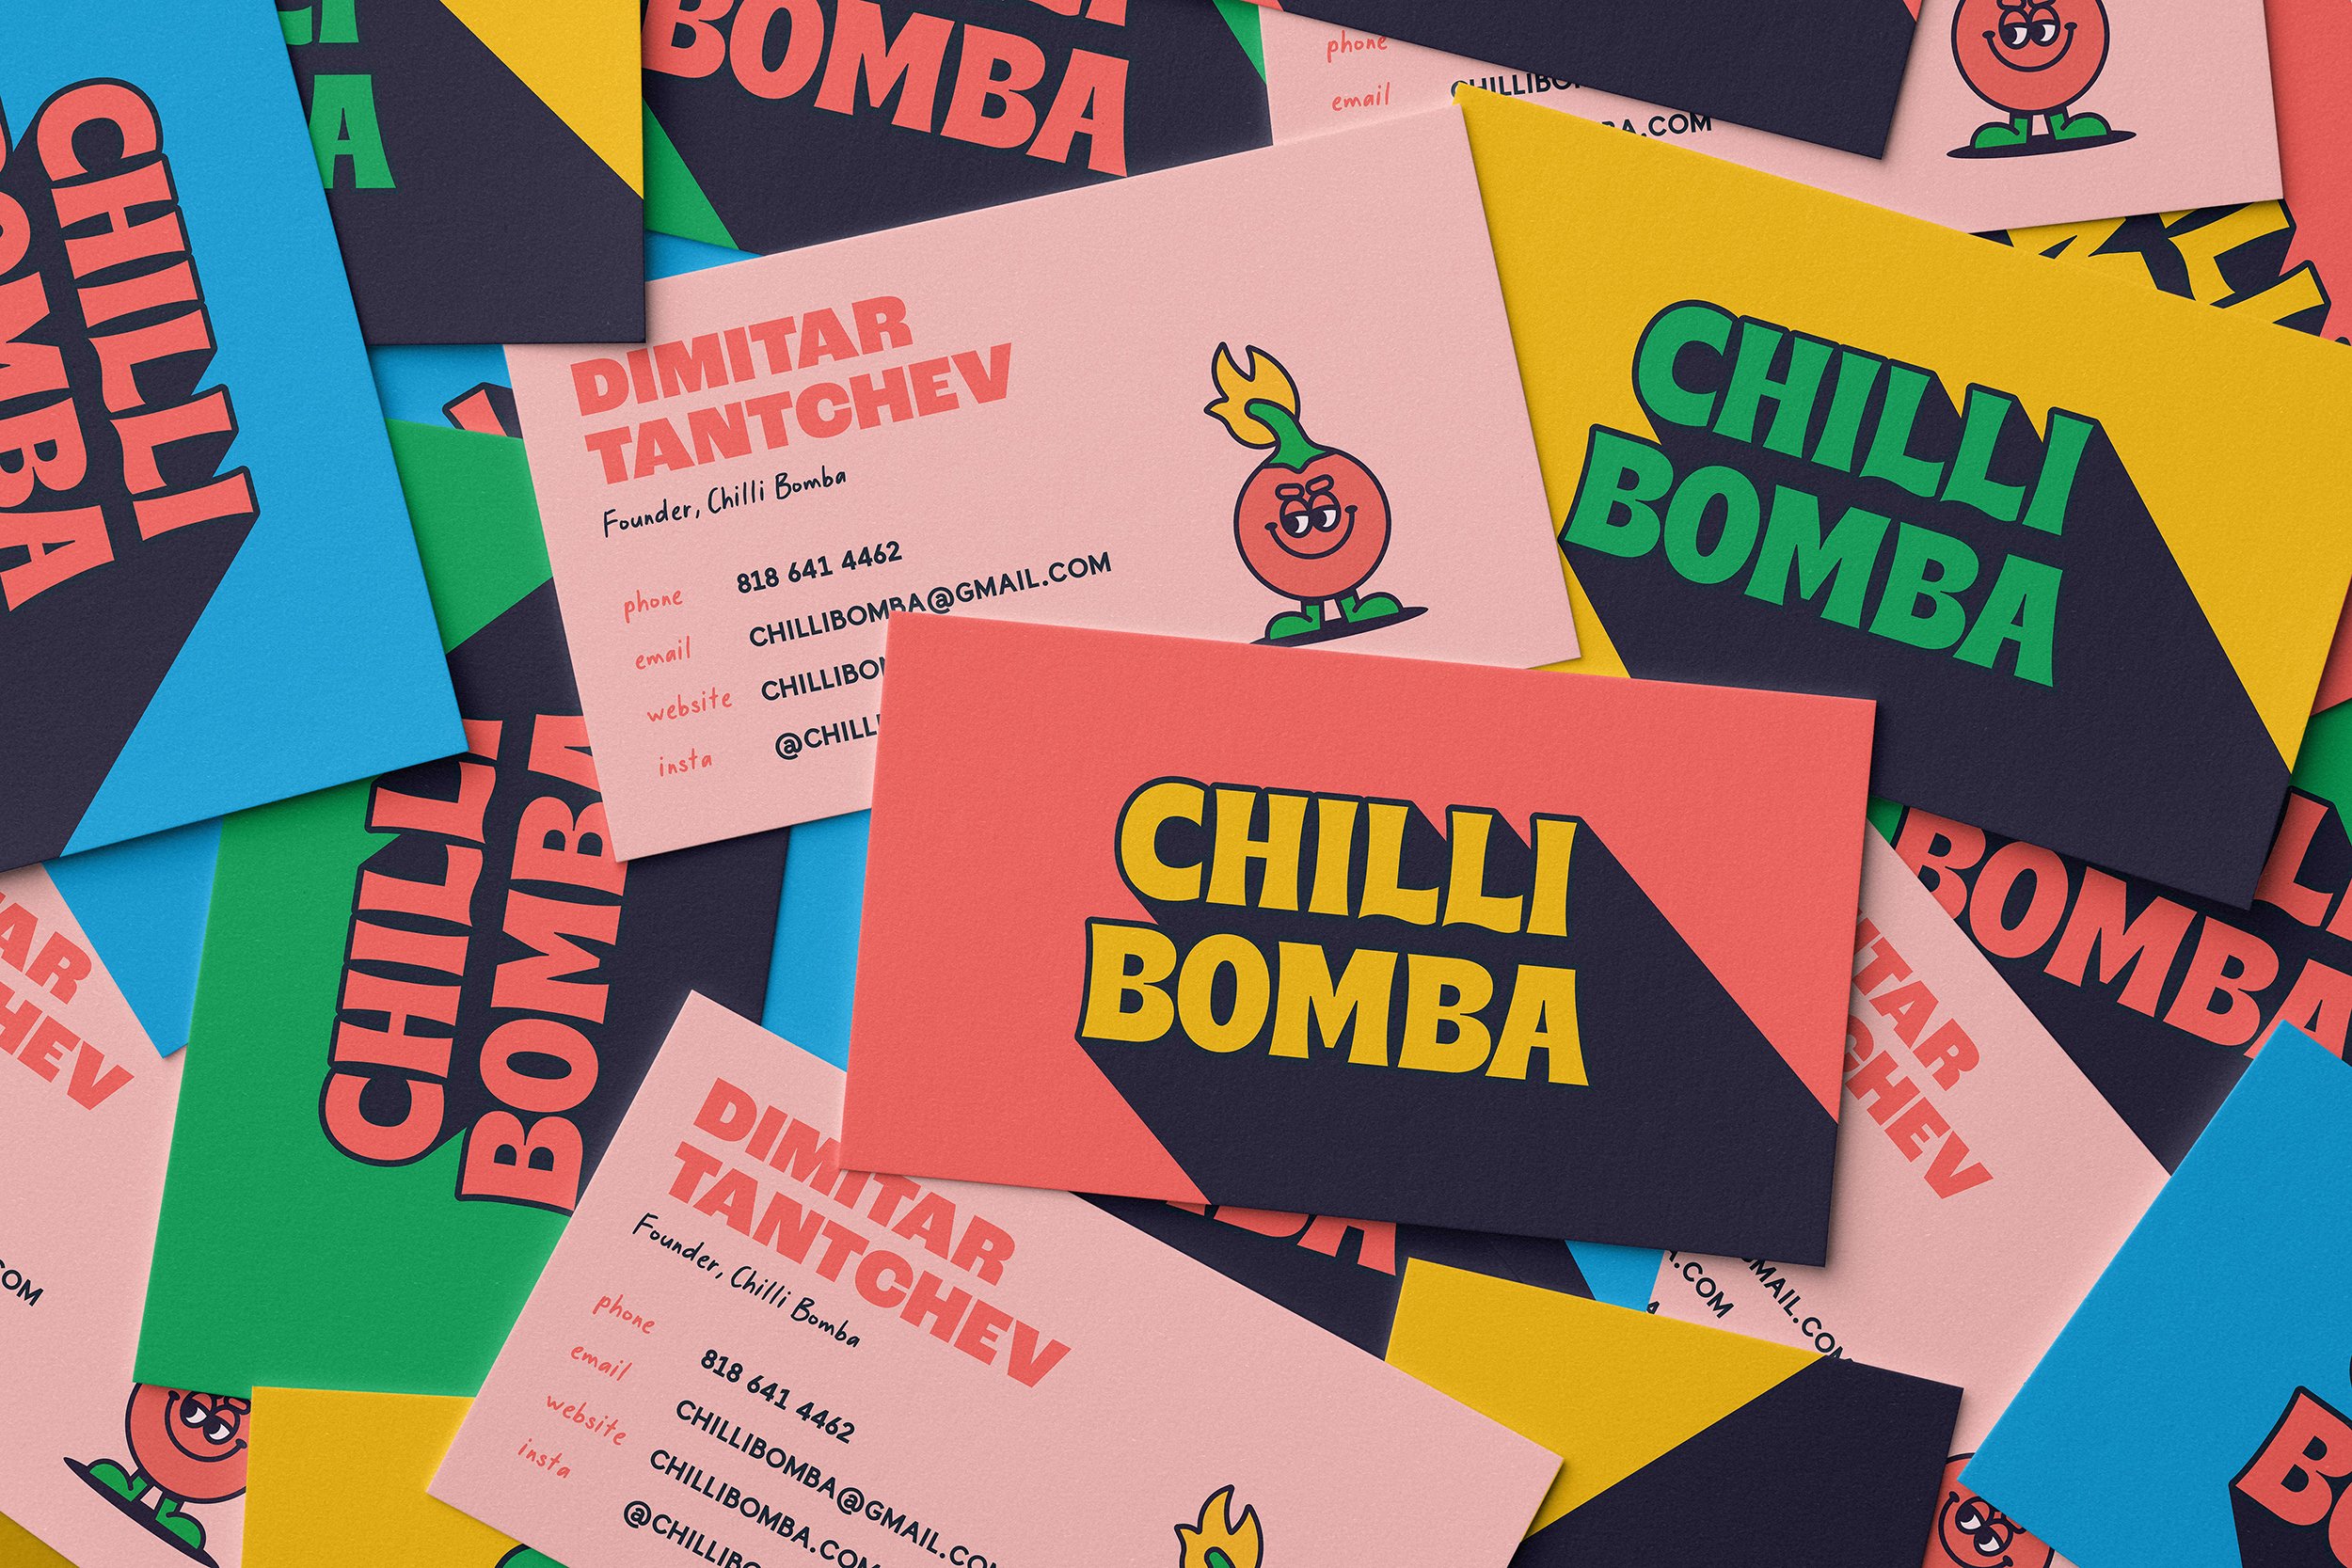 Logo, brand identity, packaging, character design and e-commerce website for gourmet adult candy Chilli Bomba designed by London-based studio New Genre